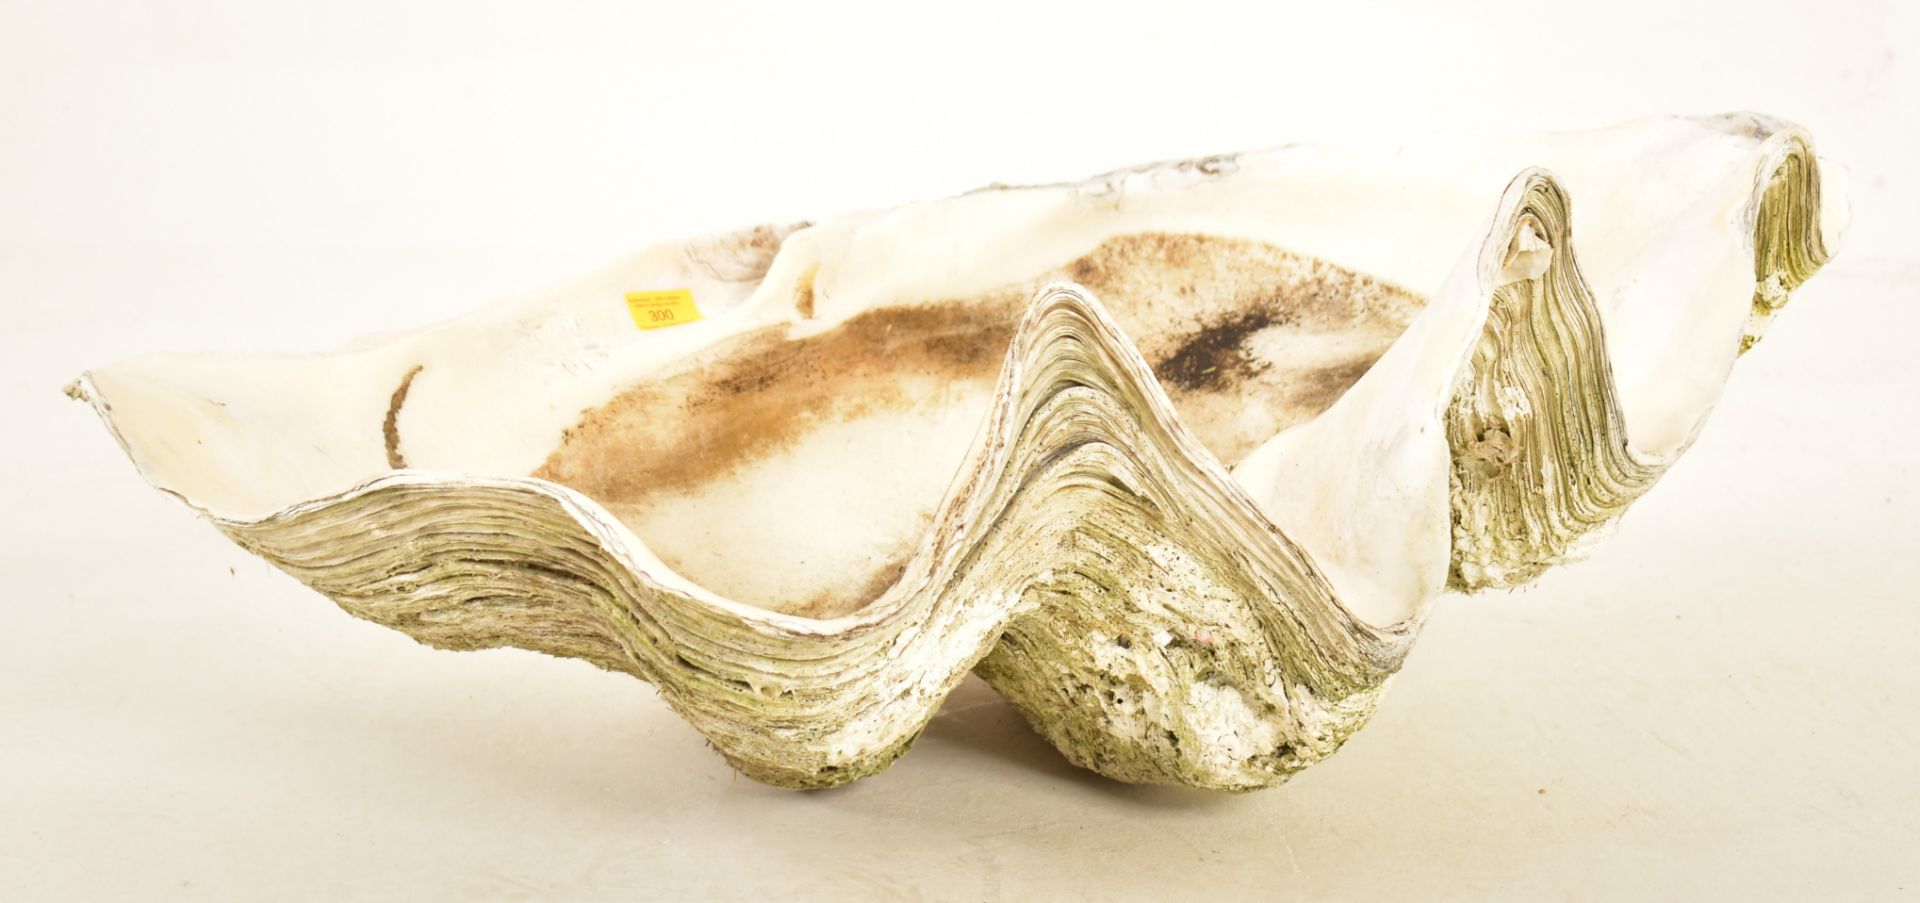 CONCHOLOGY - GIANT CLAM SHELL (TRIDACNA GIGAS) - 77CM WIDE - Image 3 of 5